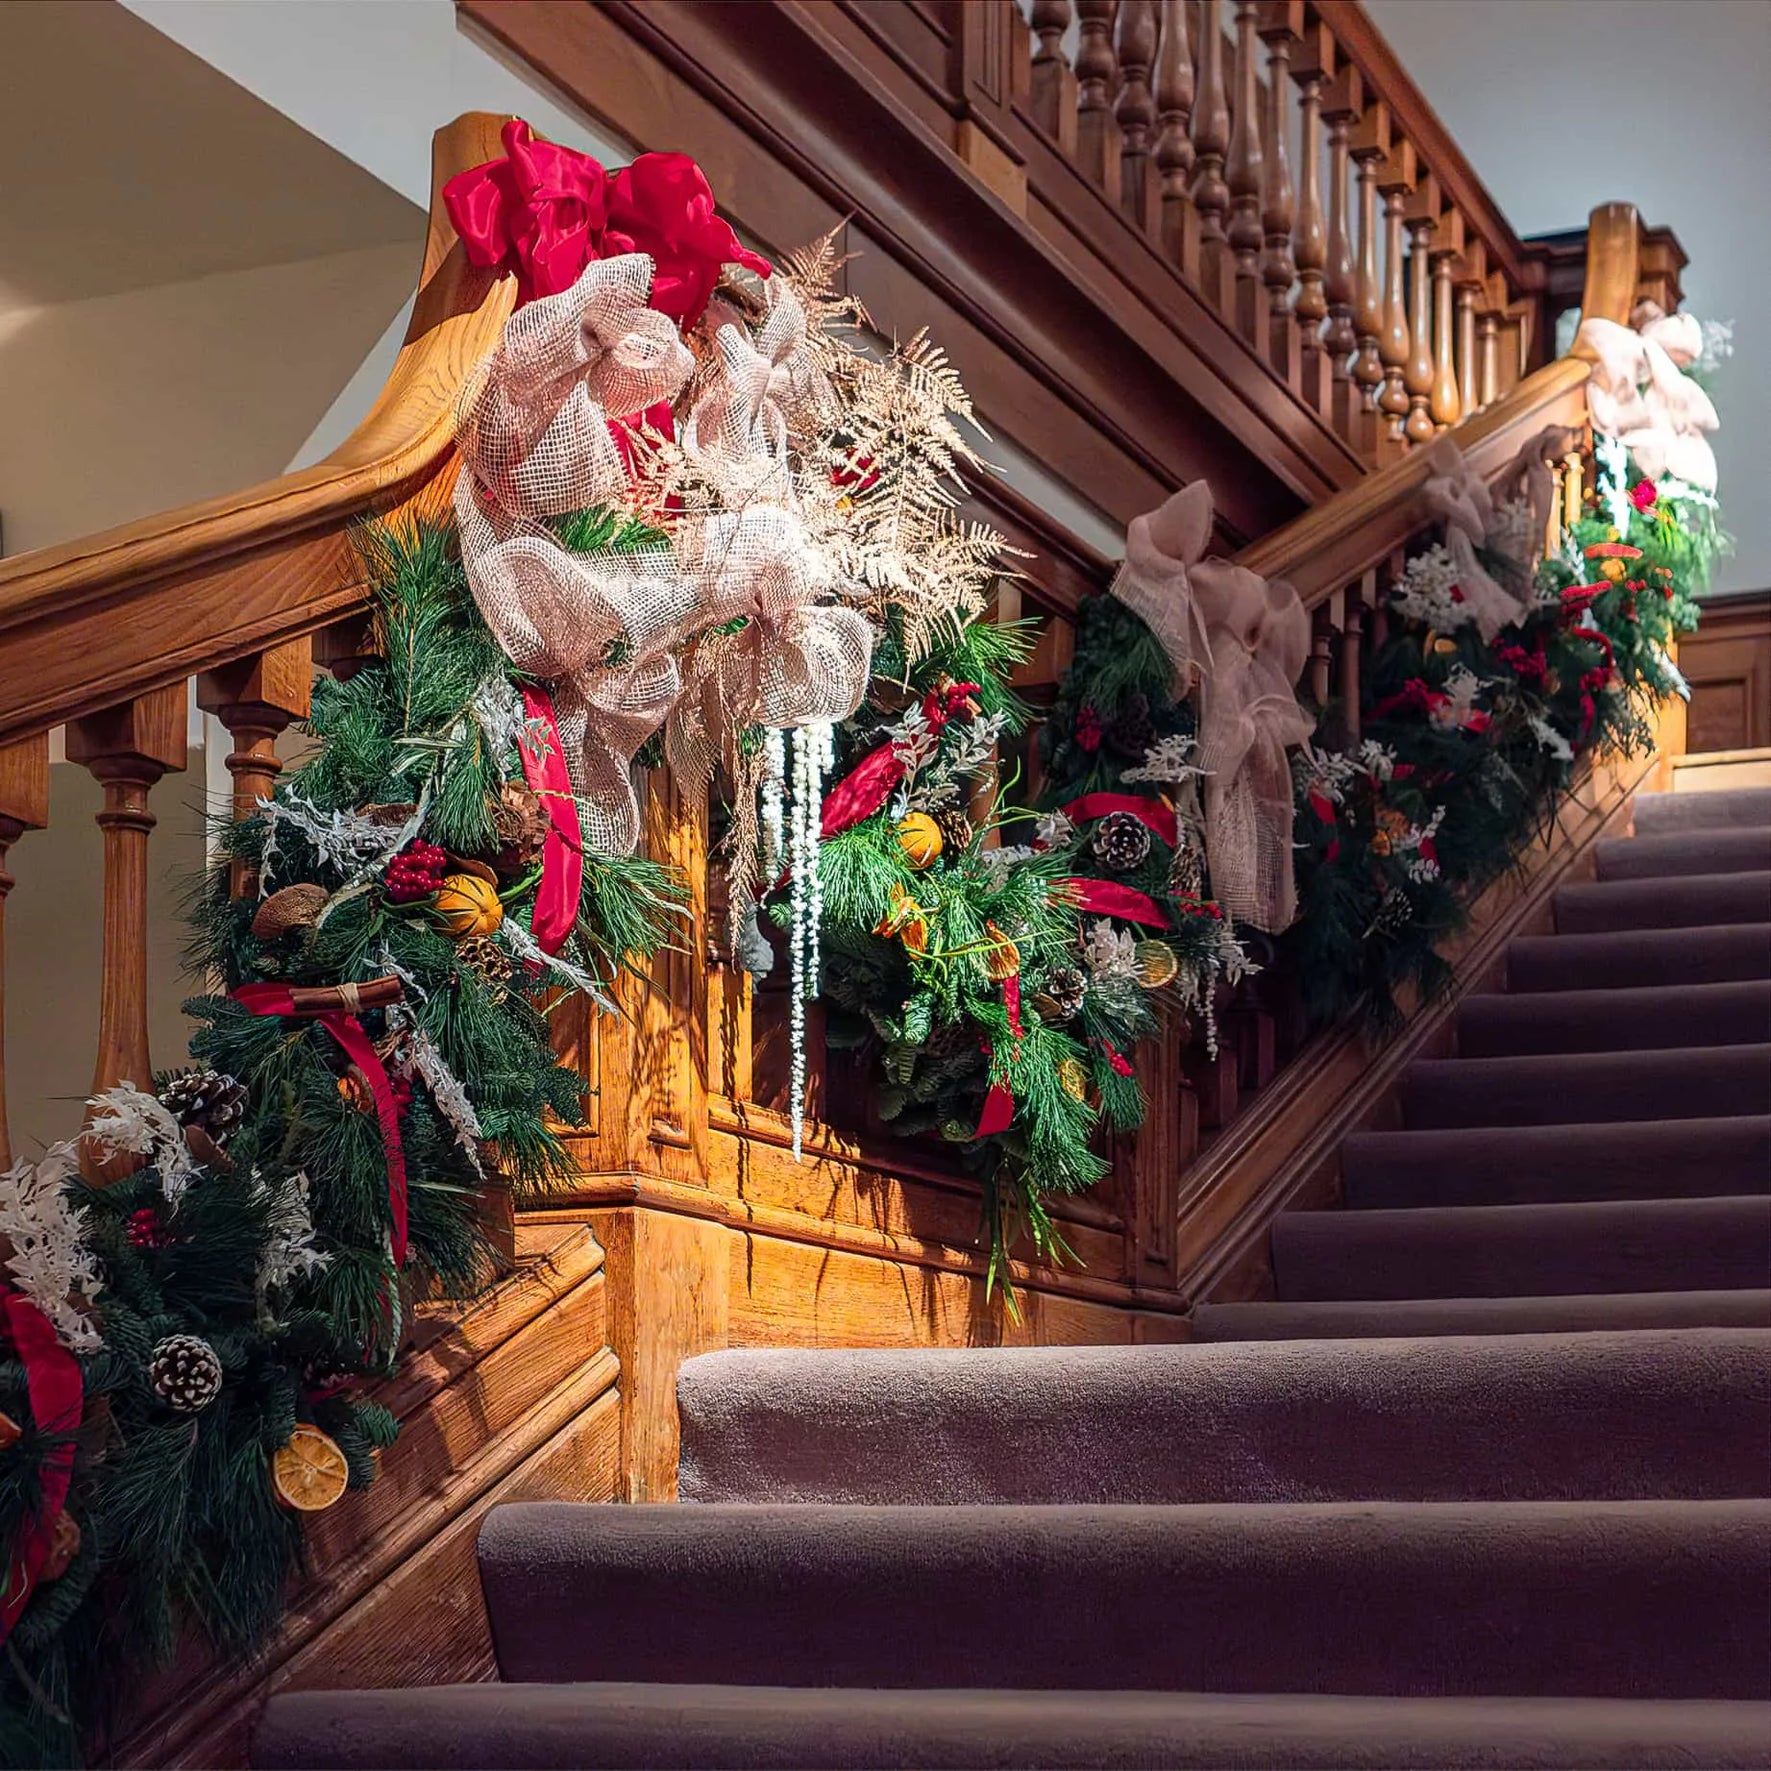 Closeup view of our Christmas Flowers decorating this wide wooden staircase at Christie's